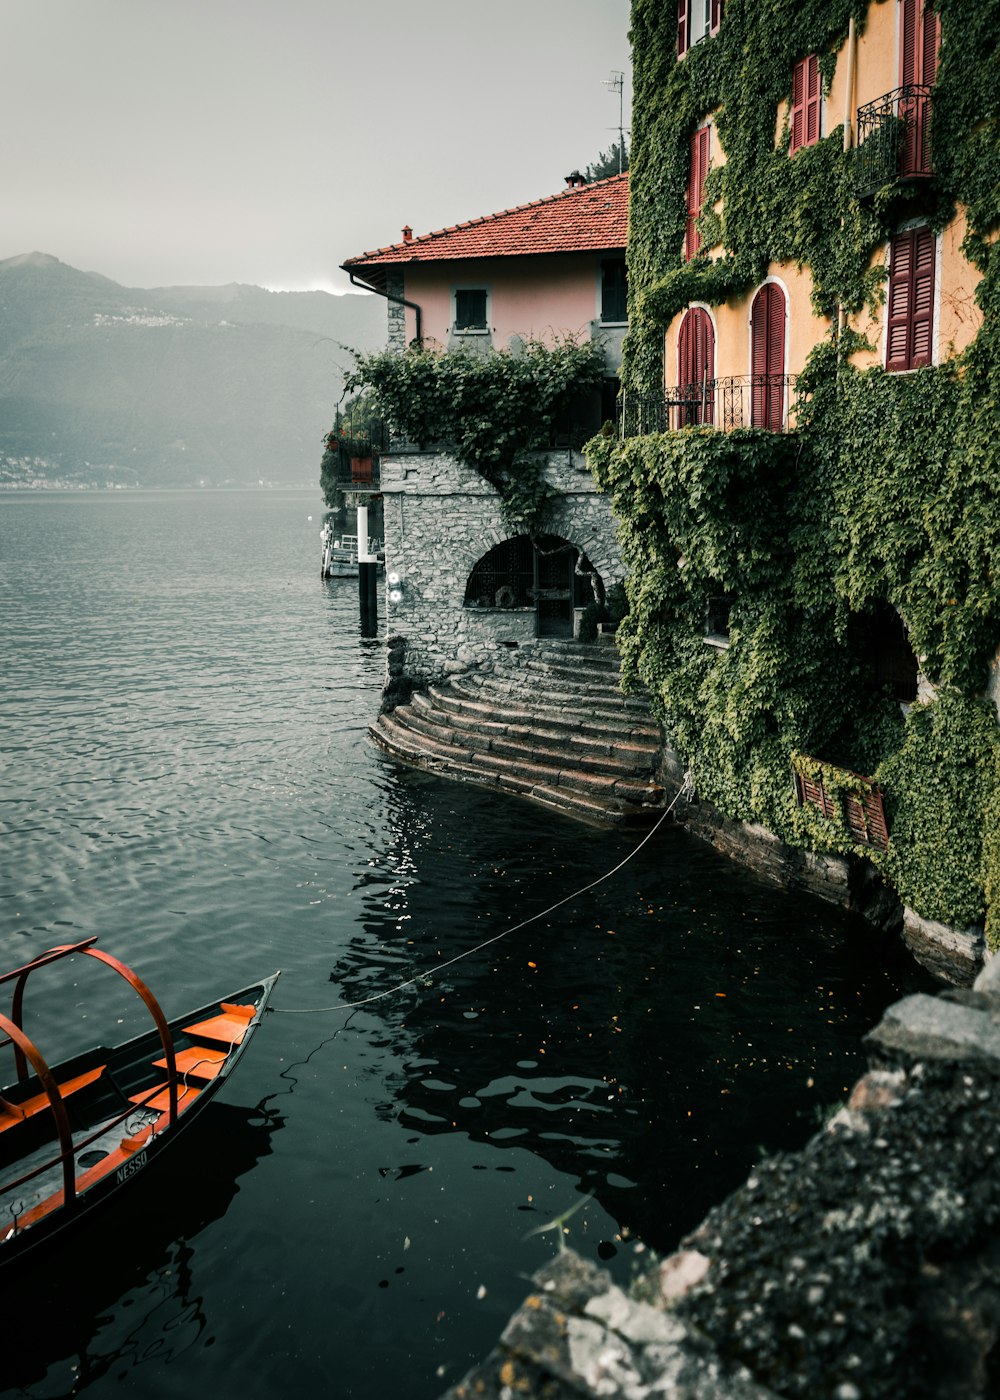 a boat in a body of water next to a building